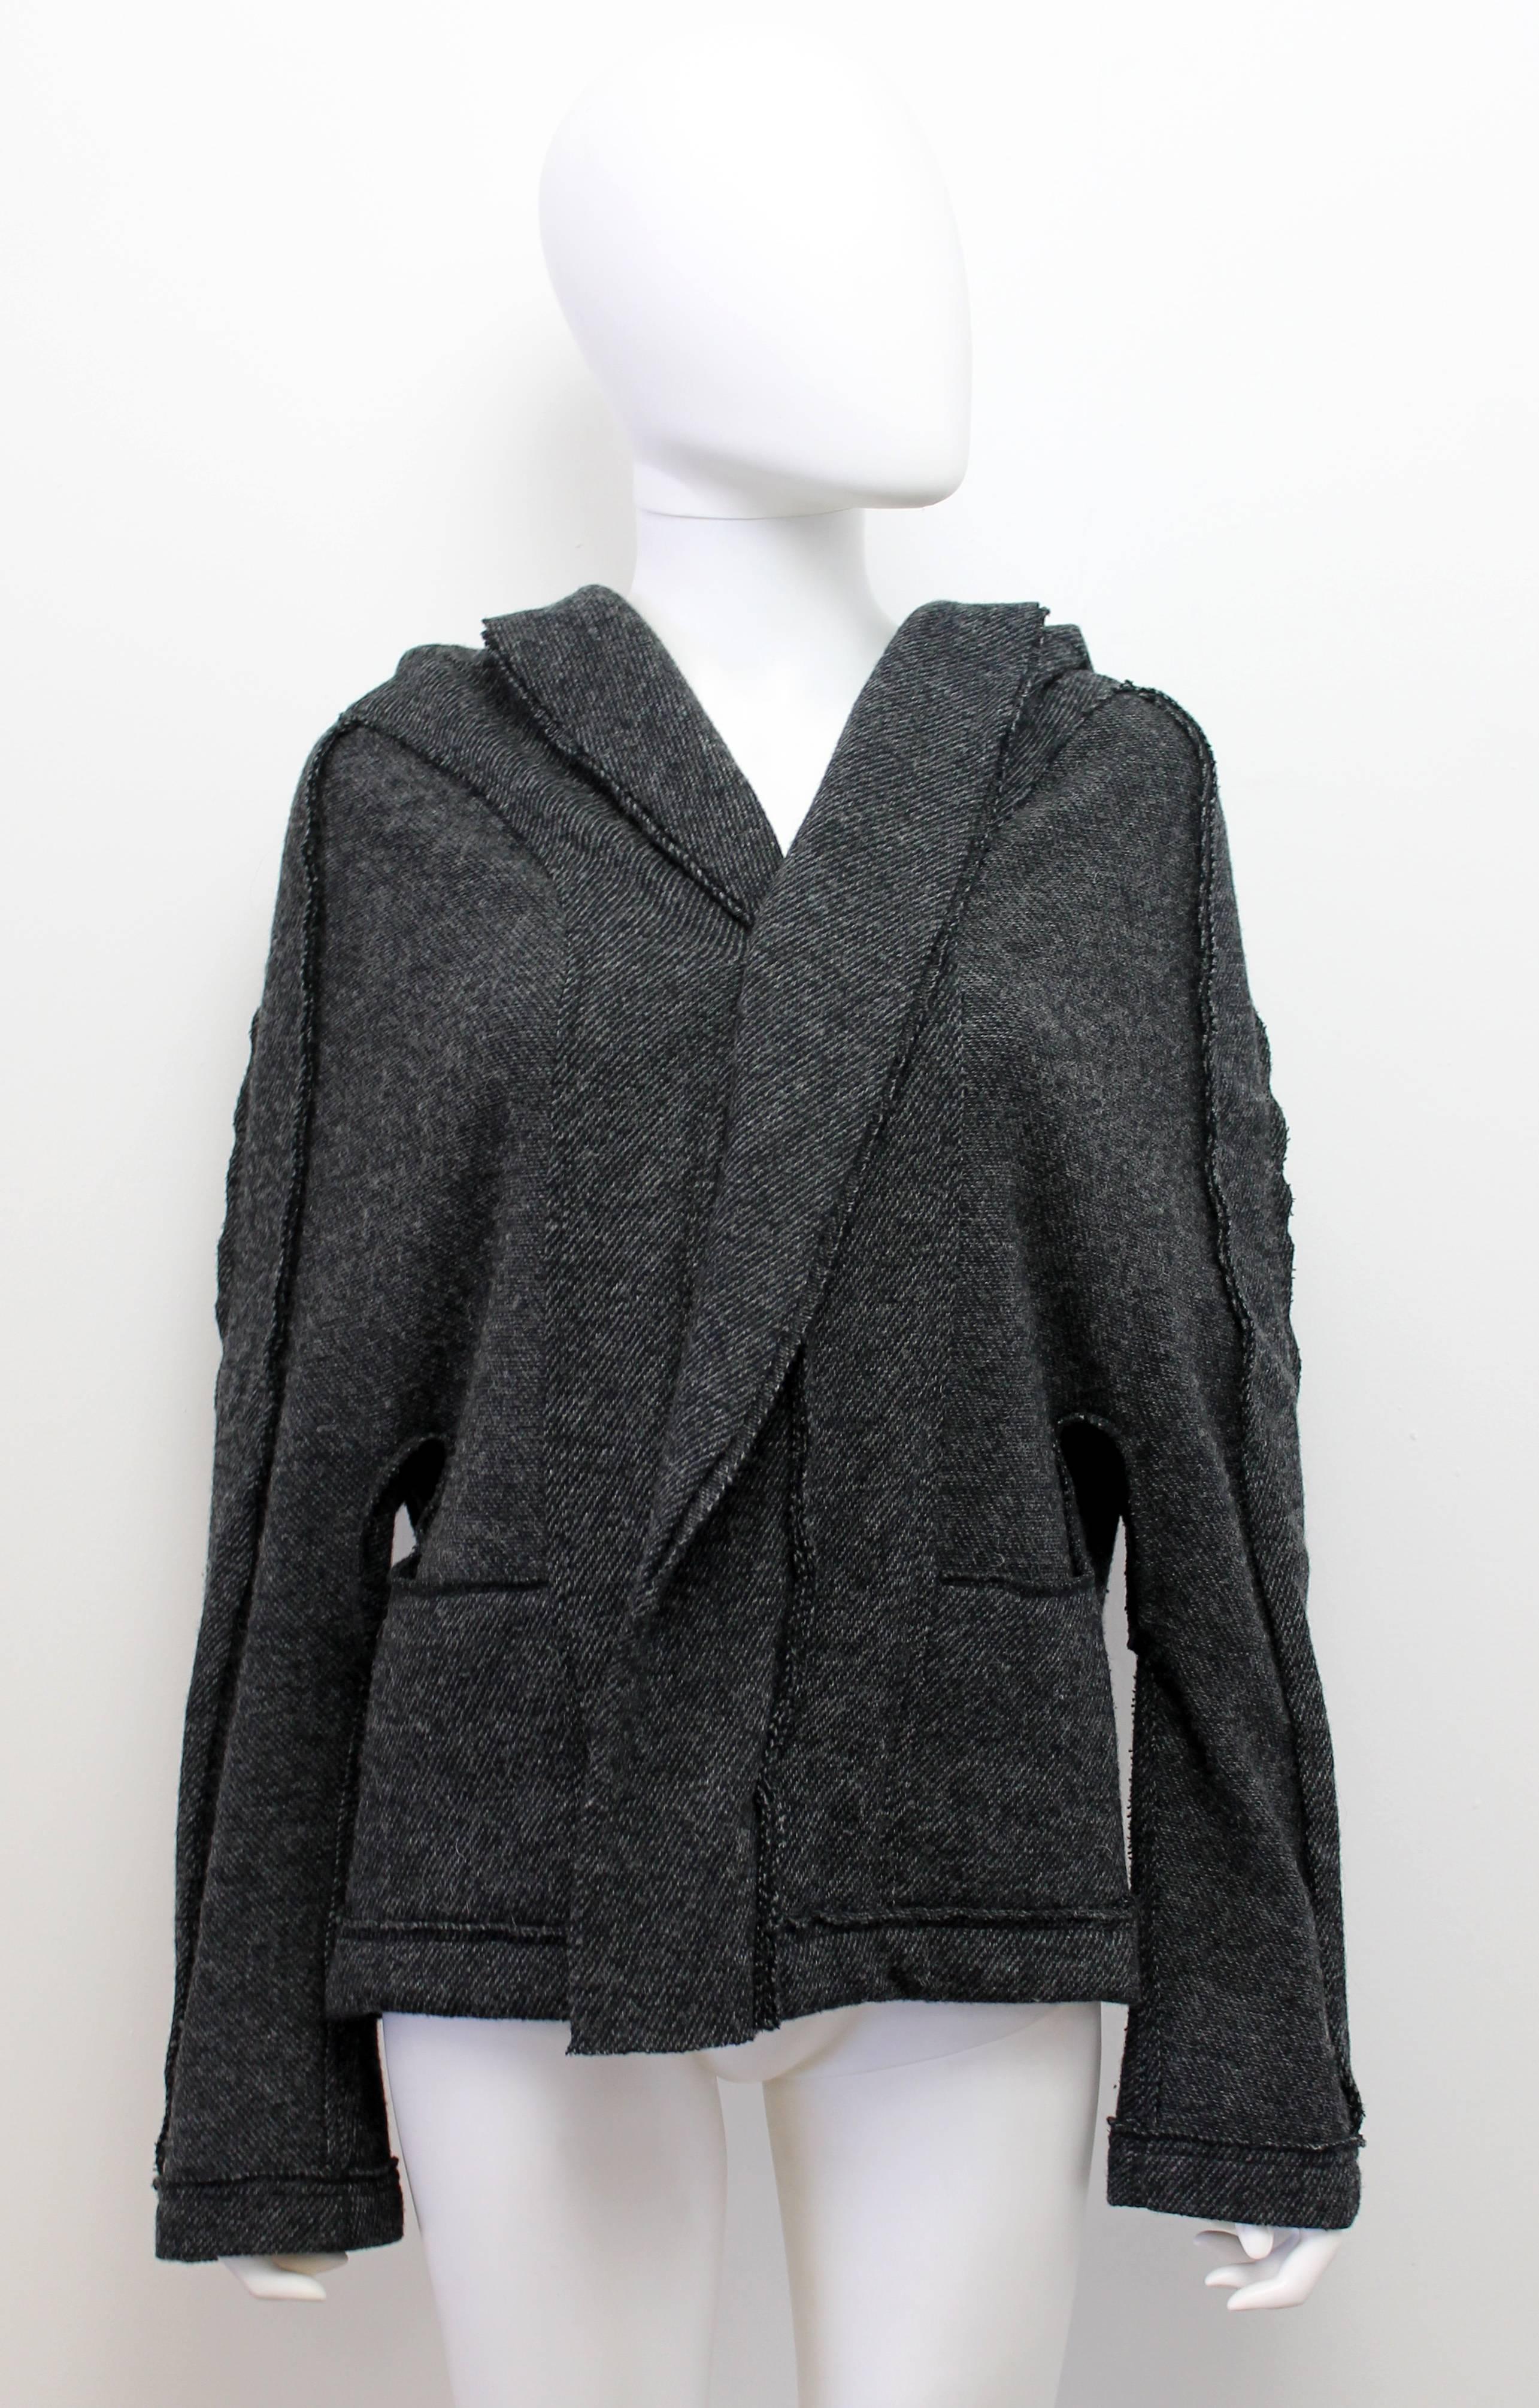 A fantastic hooded knit jacket by Yohji Yamamoto's Y's line. This piece features inverted seams and two front pockets.